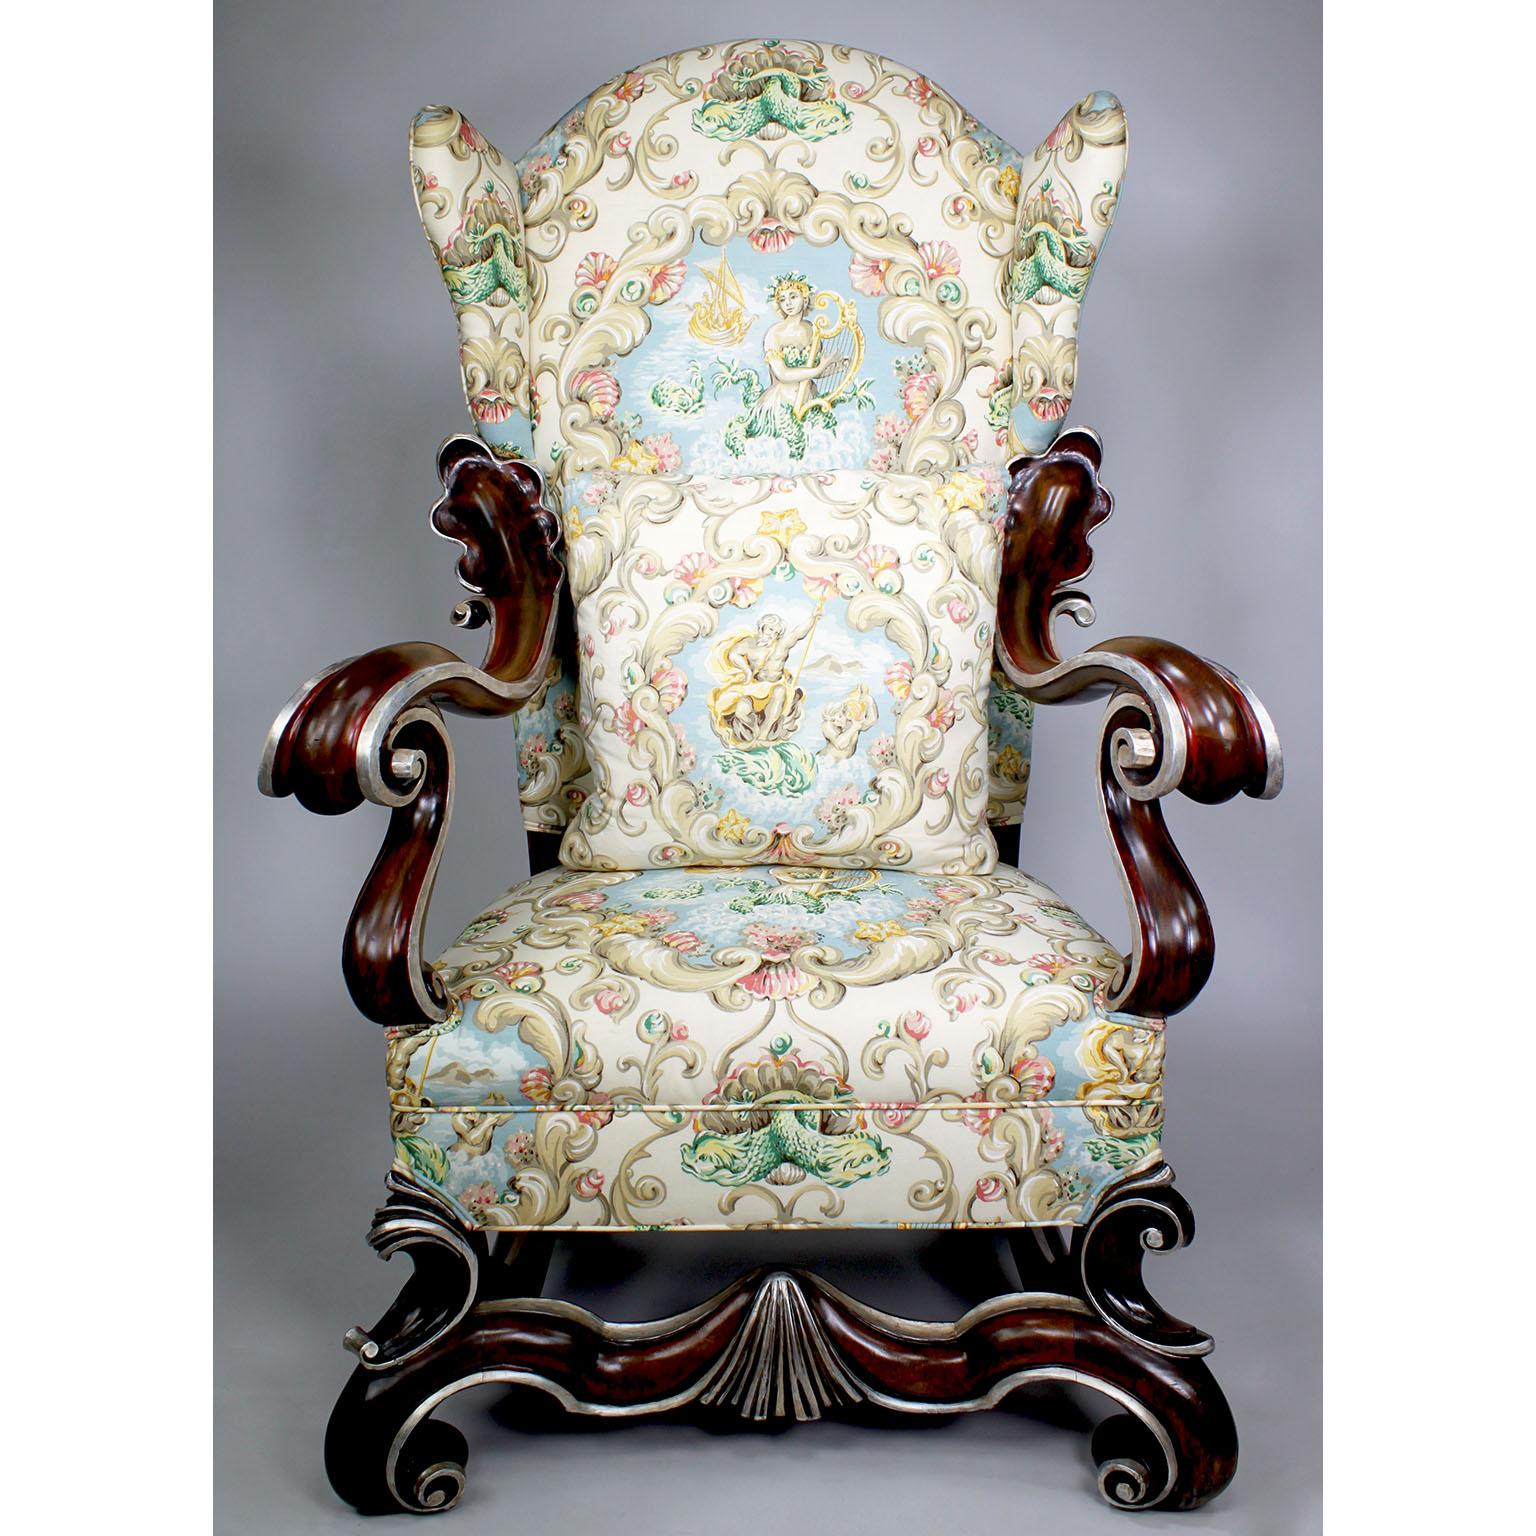 A large nicely carved pair of Baroque Revival style Walnut and Parcel-Silver Leaf Winged Throne Armchairs. The tall padded winged back armchairs, with scrolled carved walnut frames in a dark finish stain, each with finely carved open-armrests with